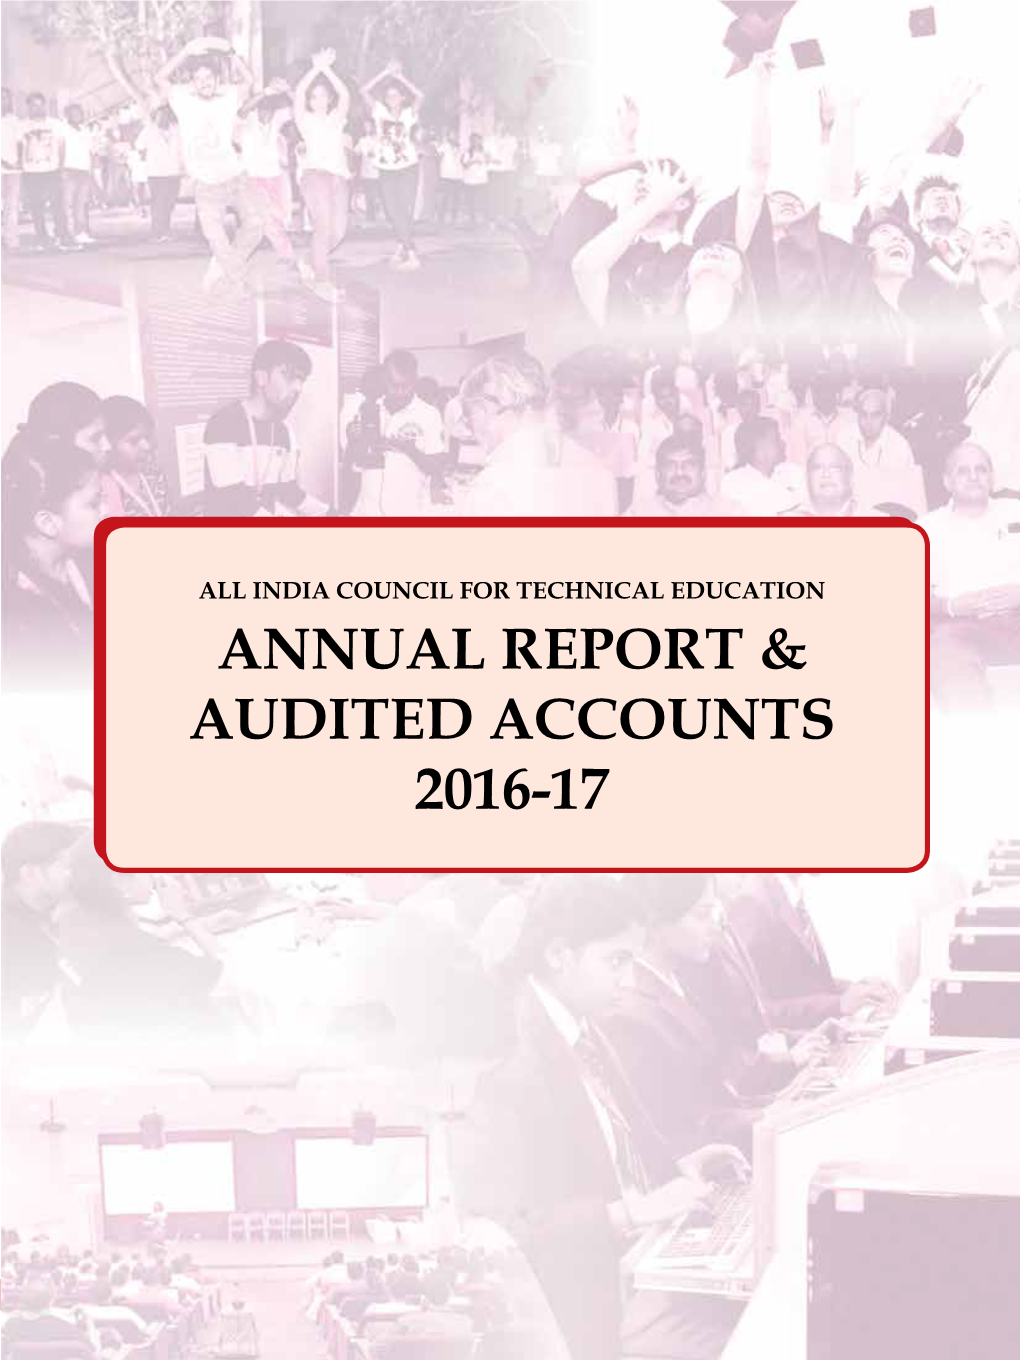 Annual Report & Audited Accounts 2016-17